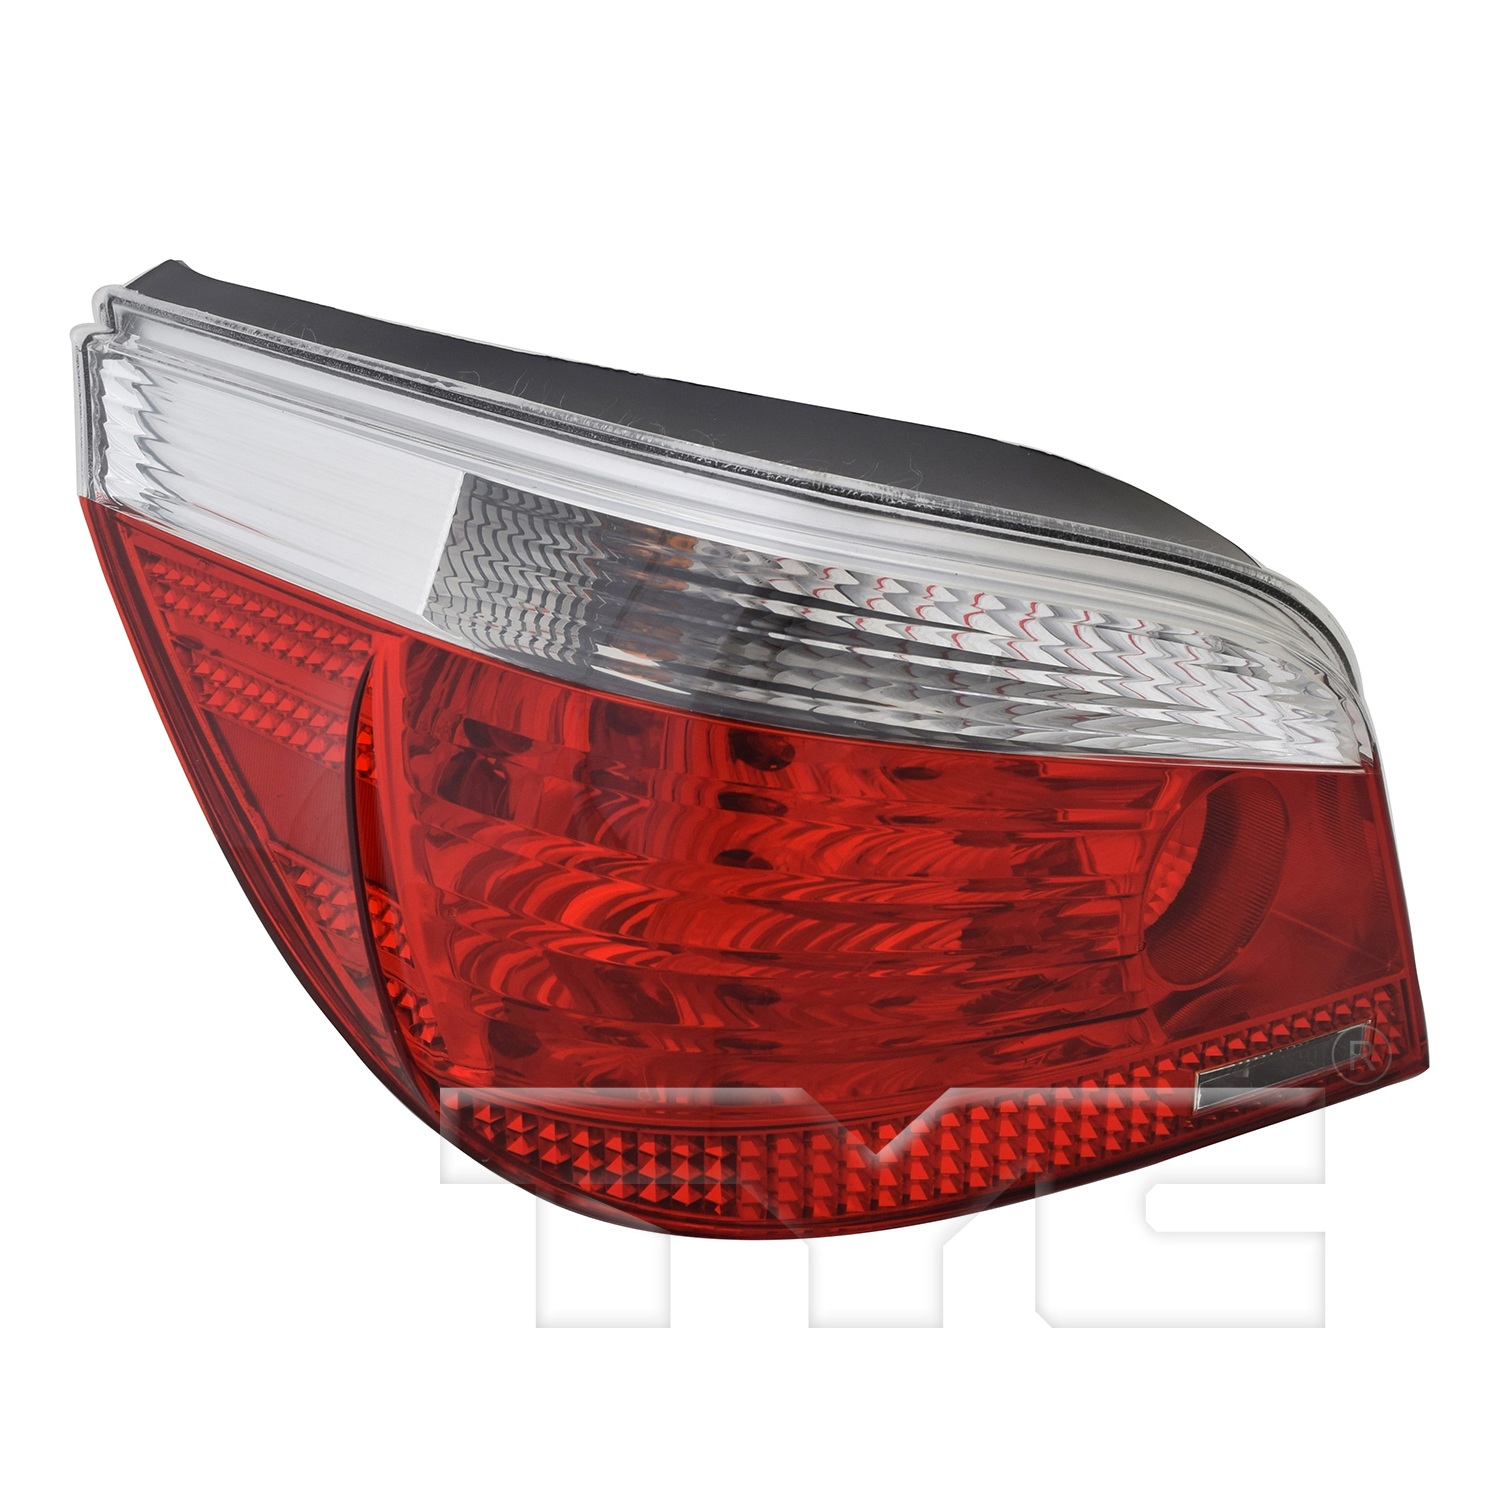 Aftermarket TAILLIGHTS for BMW - 545I, 545i,04-05,LT Taillamp assy